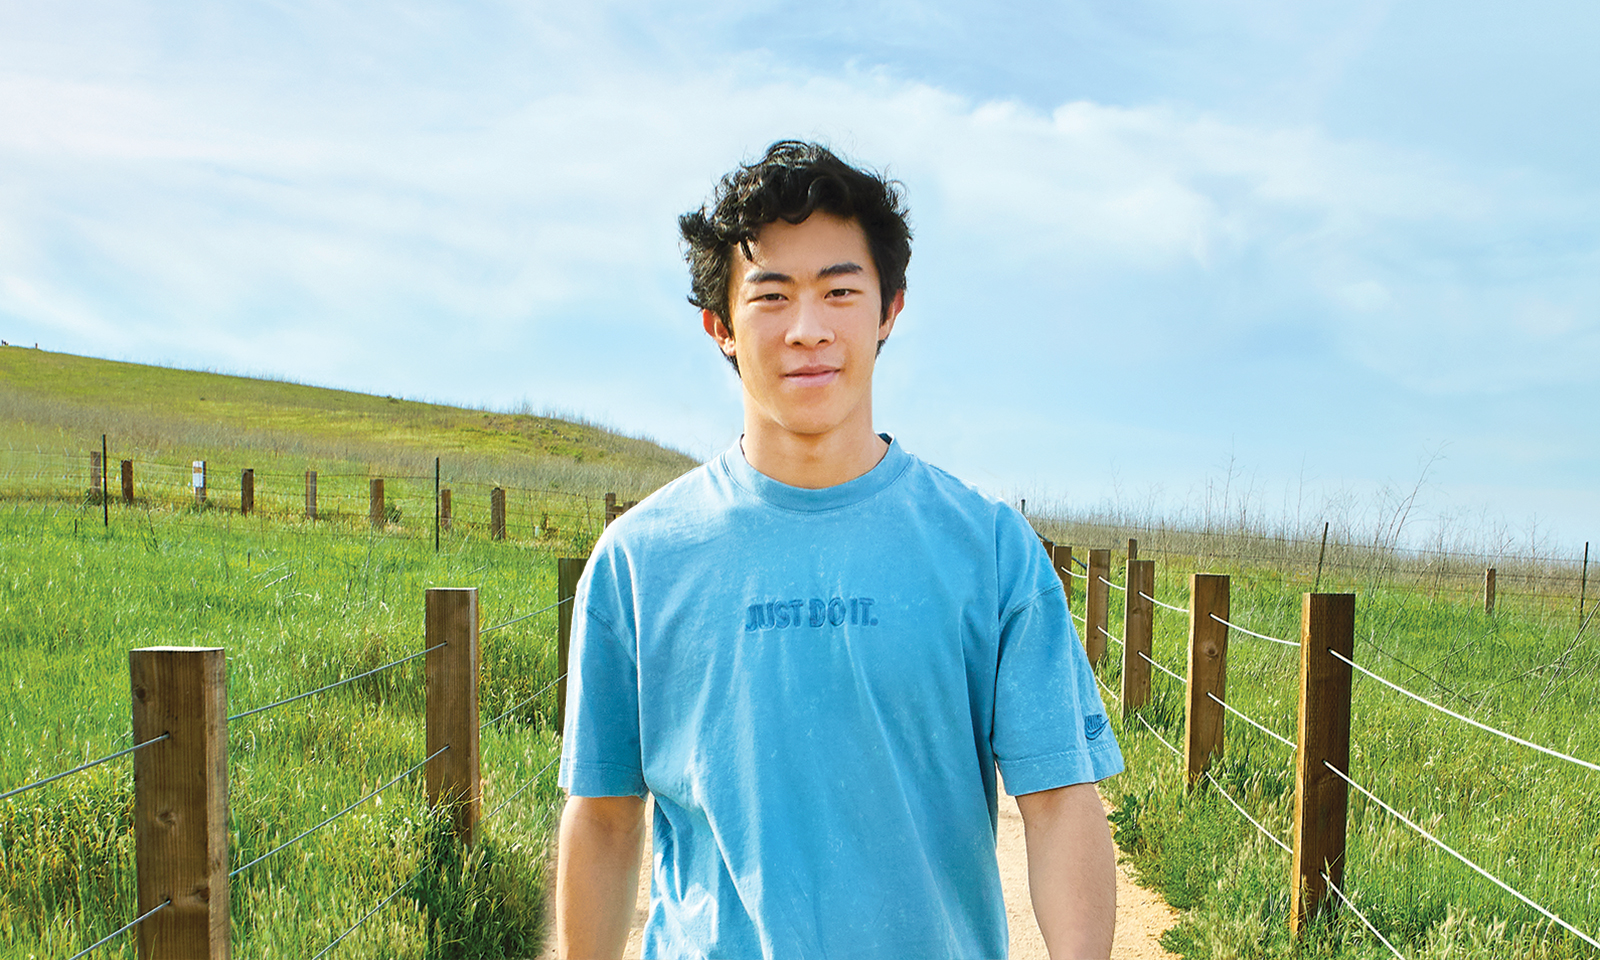 On the trail with gold medalist Nathan Chen